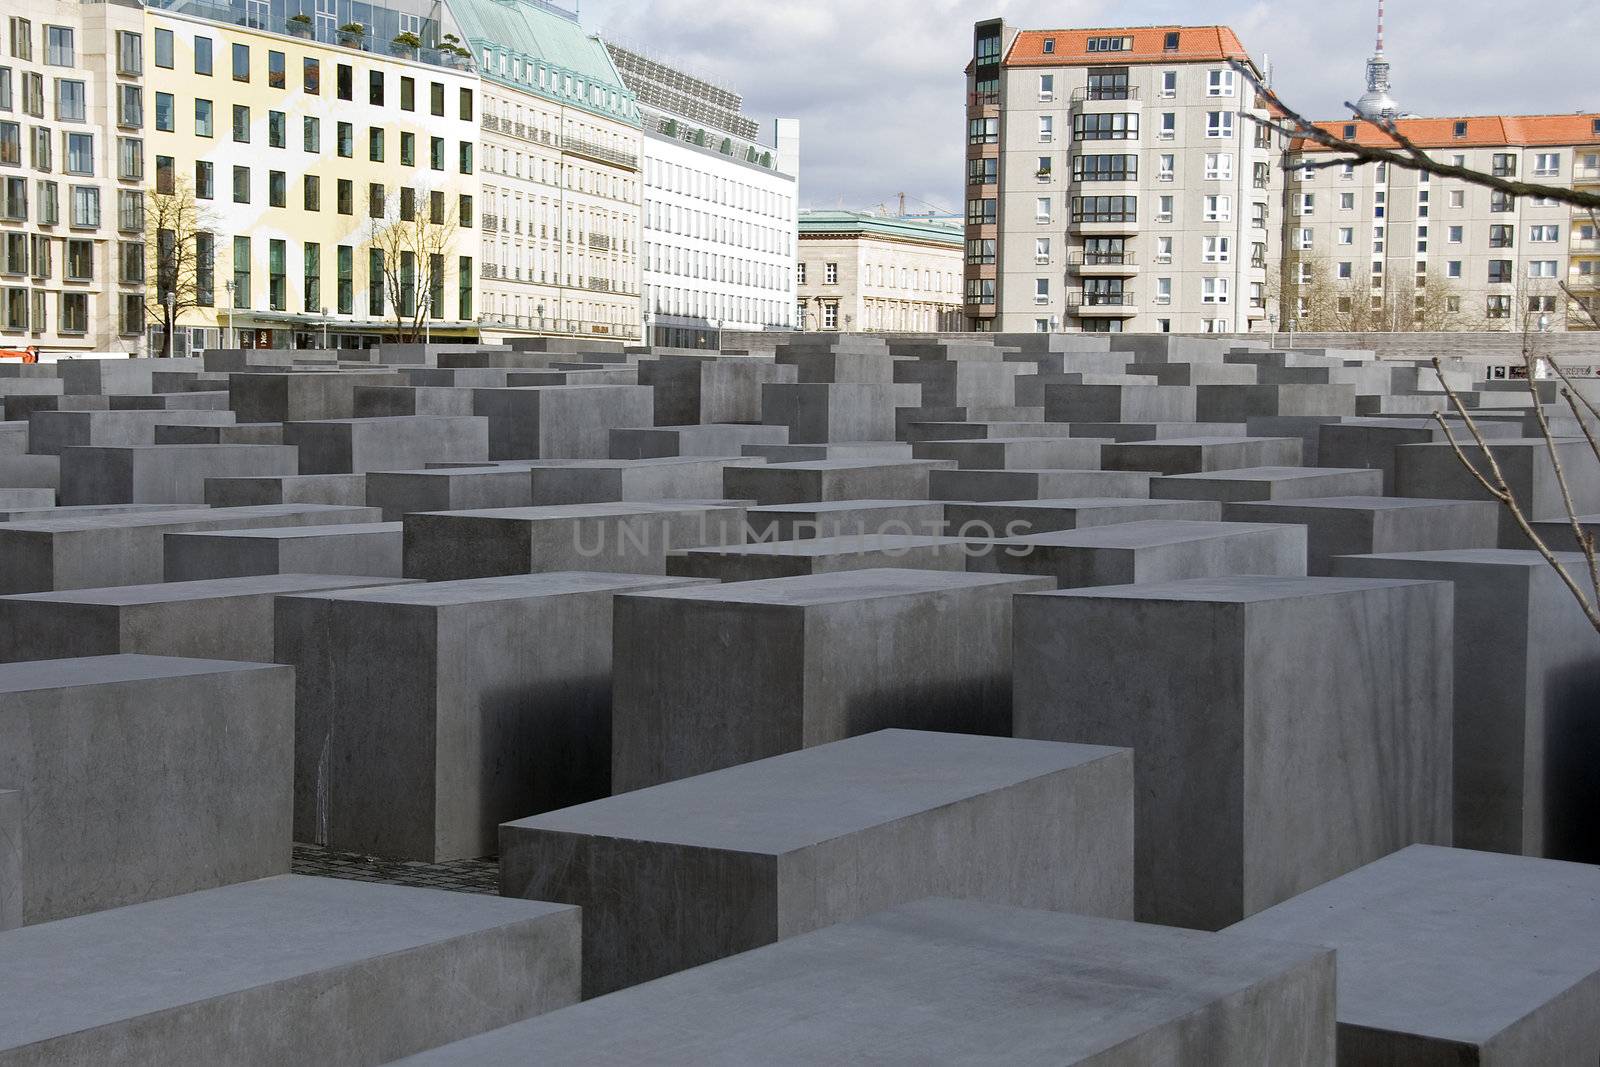 The Holocaust memorial monument in Berlin  by compuinfoto